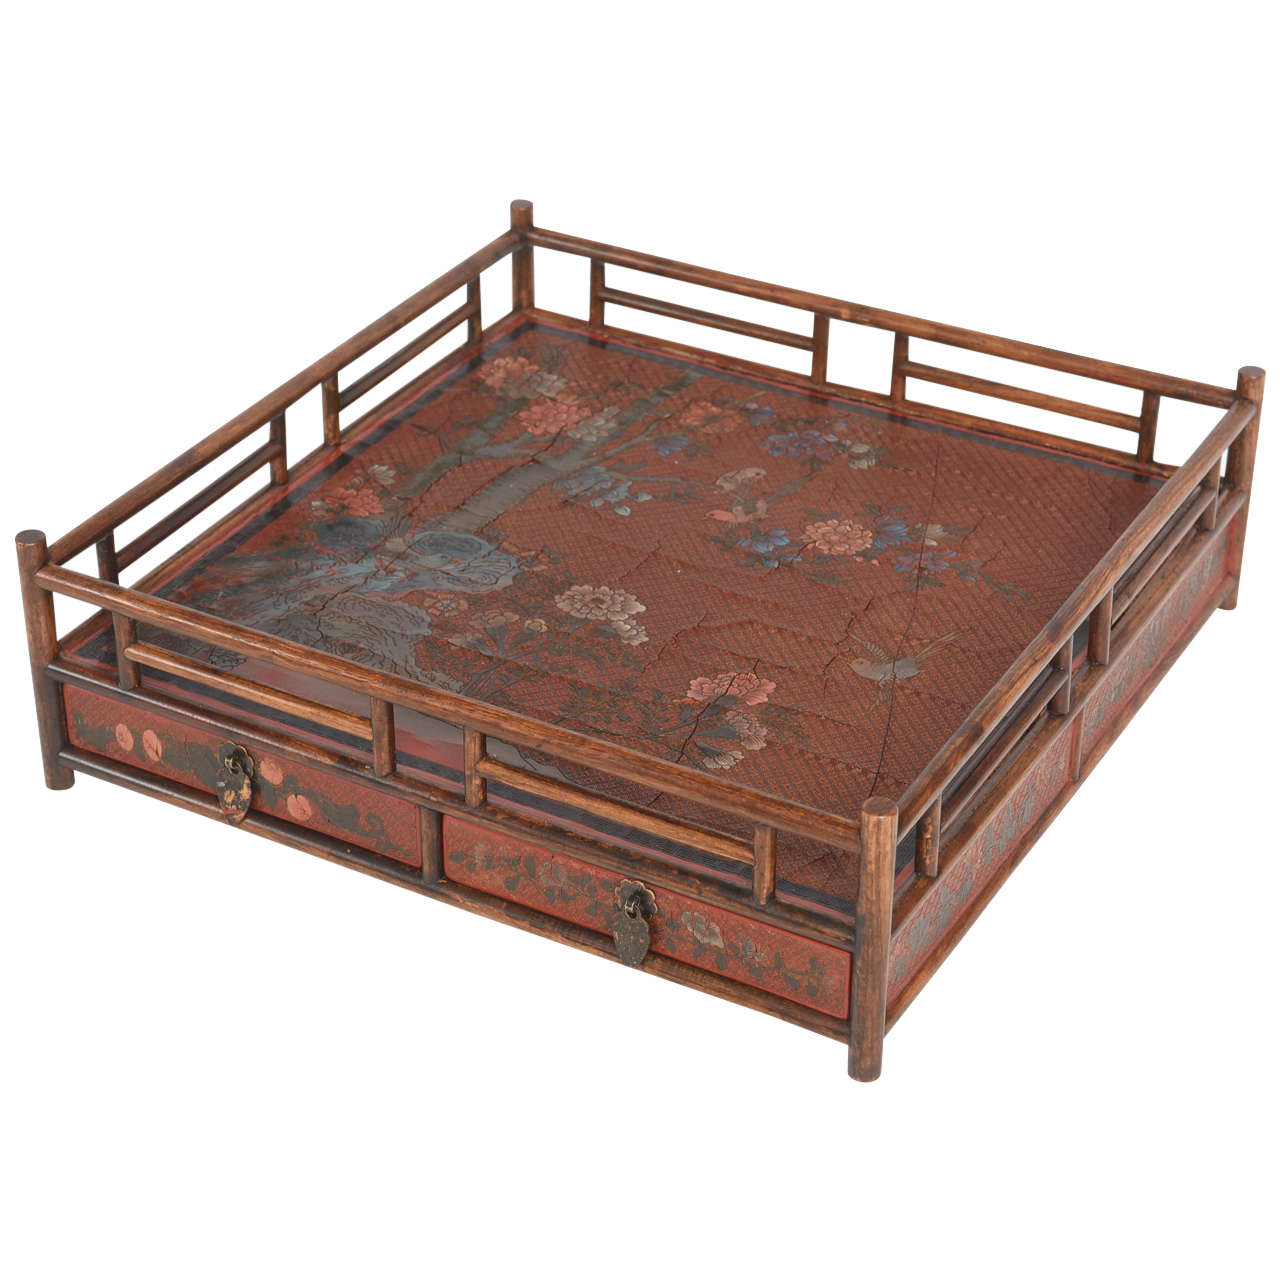 Rare 19th Century Chinese Bamboo Tea Tray with Landscape Motif